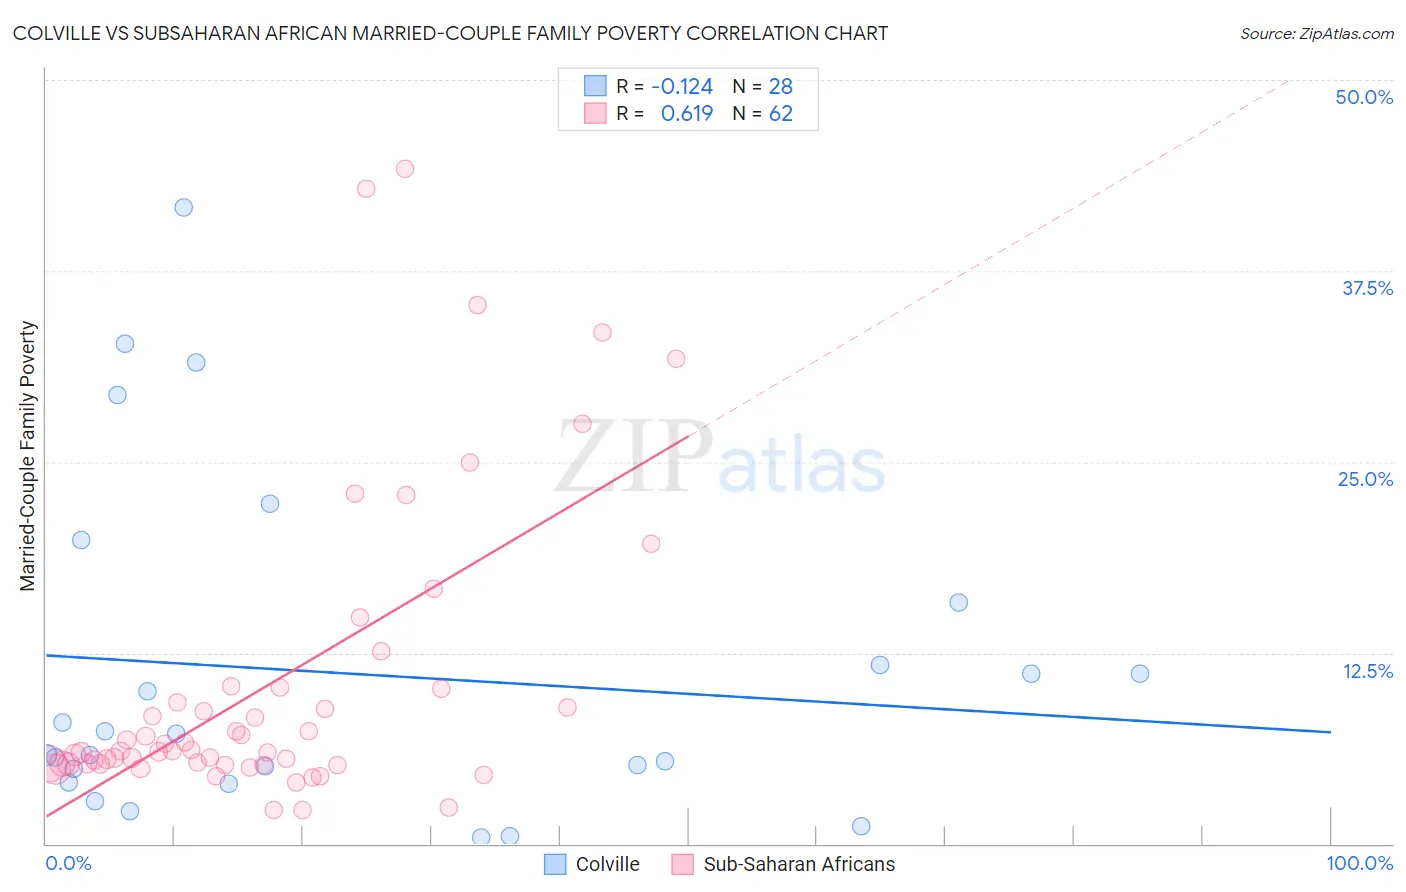 Colville vs Subsaharan African Married-Couple Family Poverty